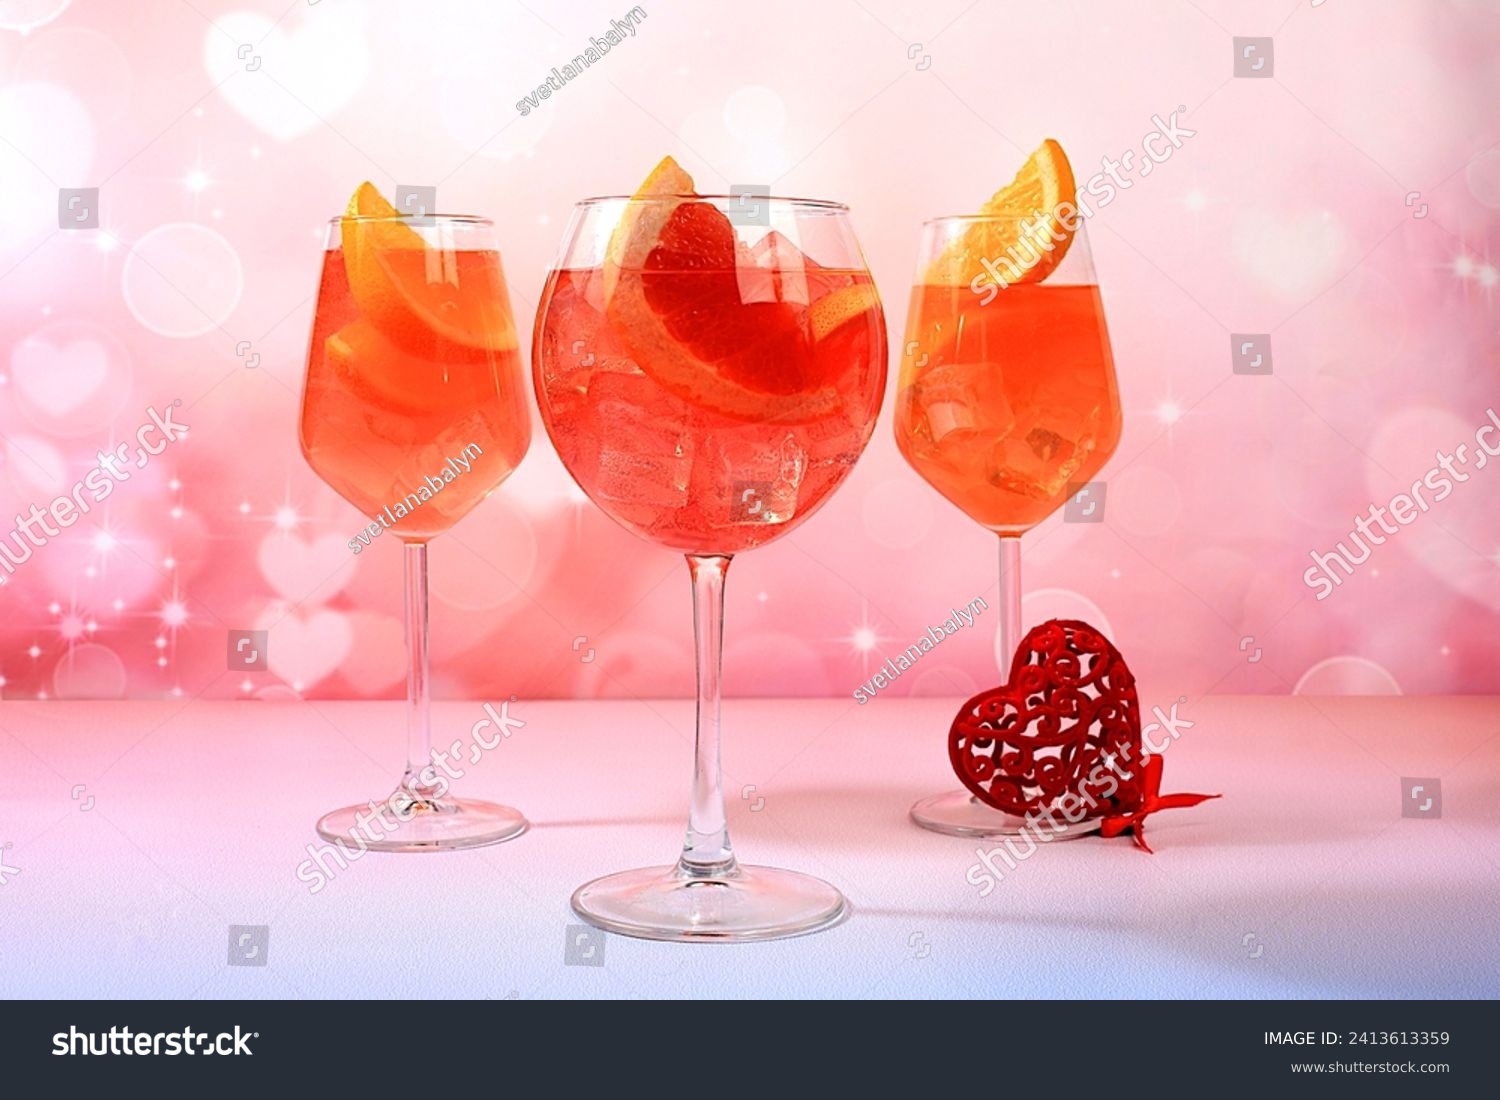 Festive alcoholic cocktail Aperol spritz in glasses and love hearts, bar concept and valentine's day, alcoholic drinks at party, restaurant advertising, selective focus #2413613359